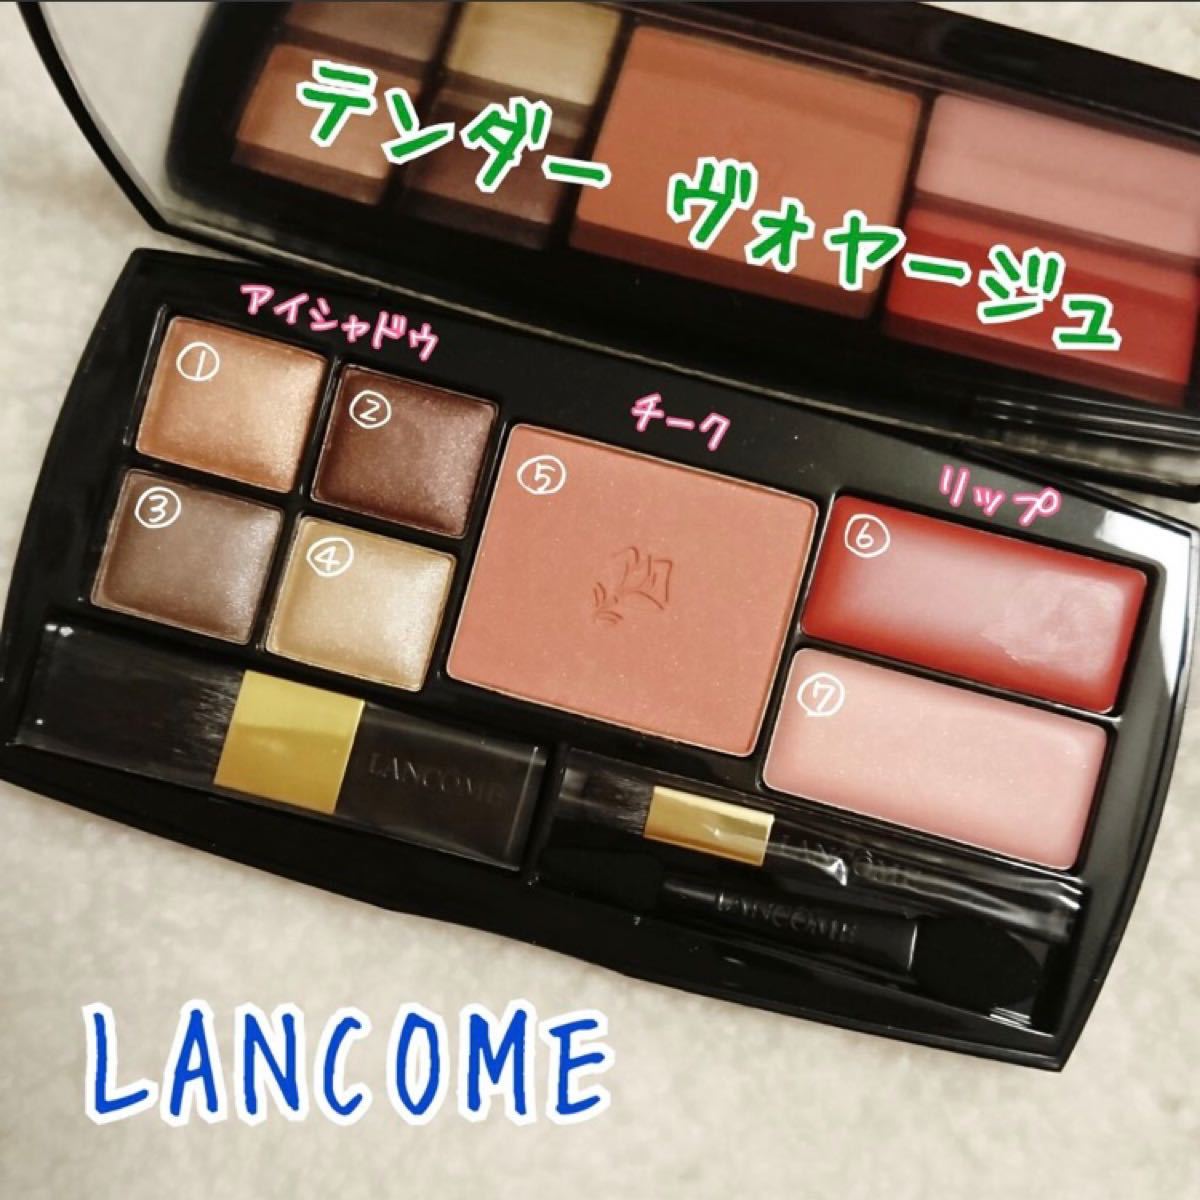 LANCOME】TENDRE VOYAGE 免税店限定品｜PayPayフリマ